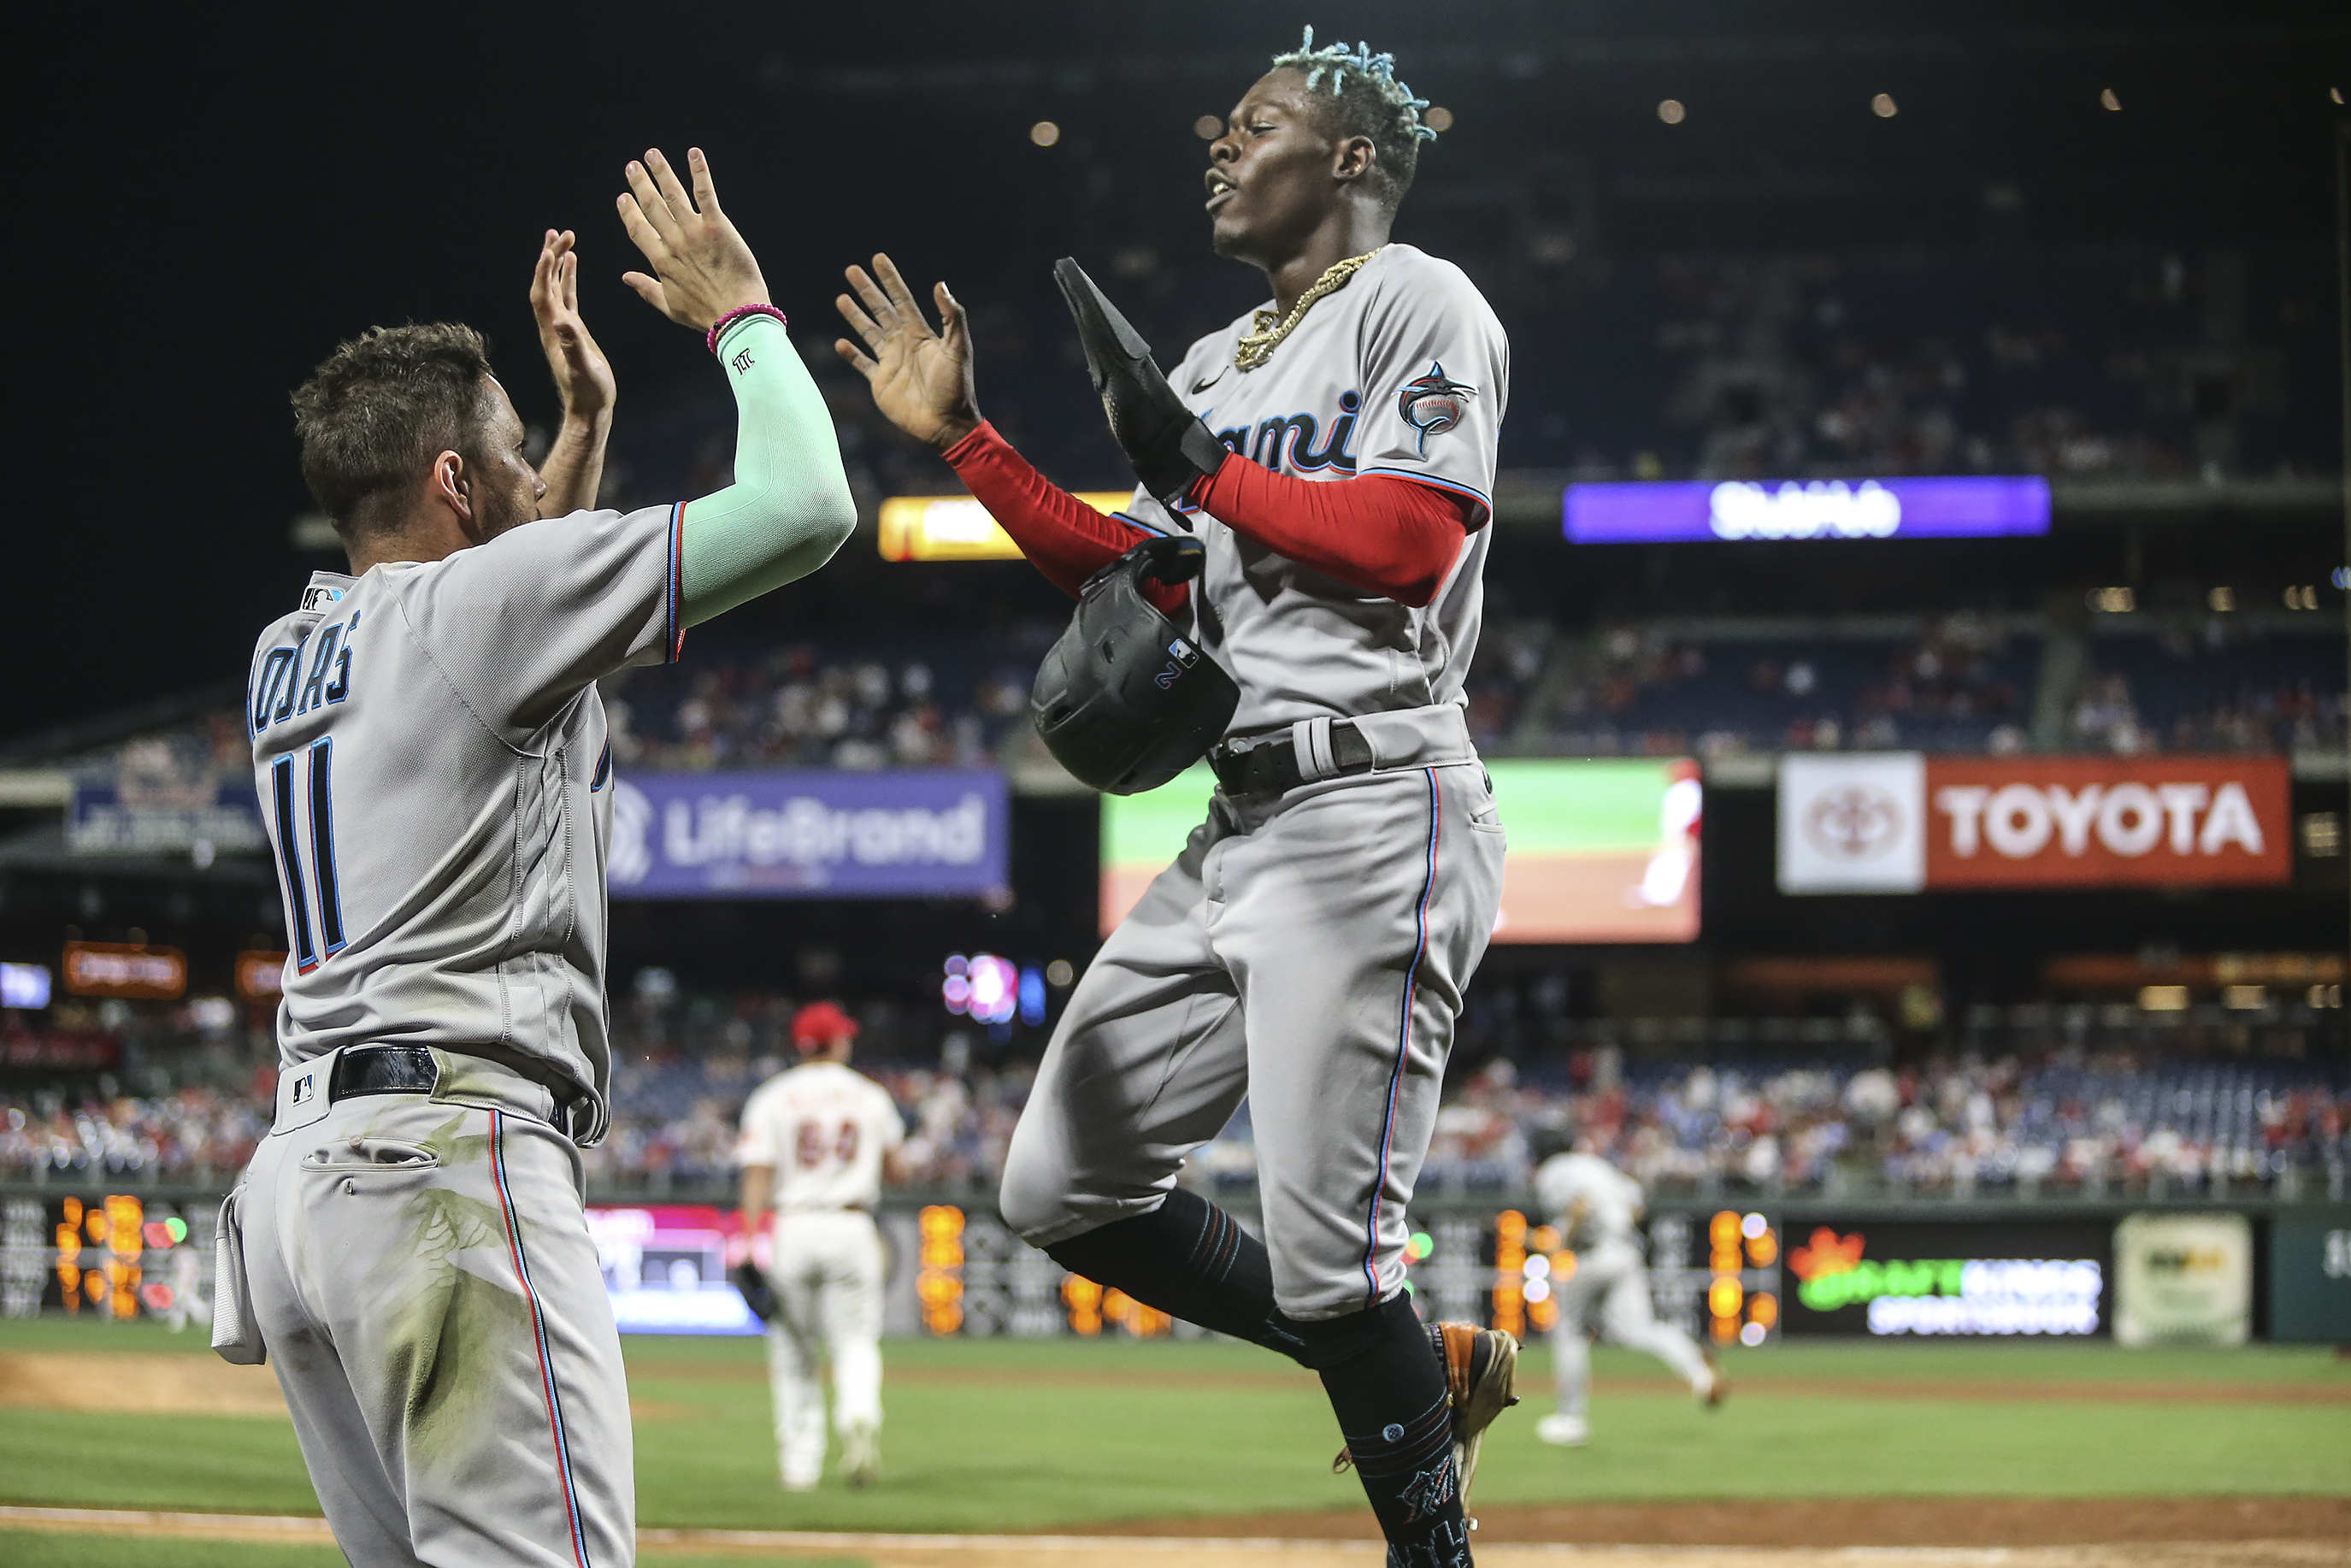 Rhys Hoskins' big error leads to Phillies' loss to Marlins - CBS